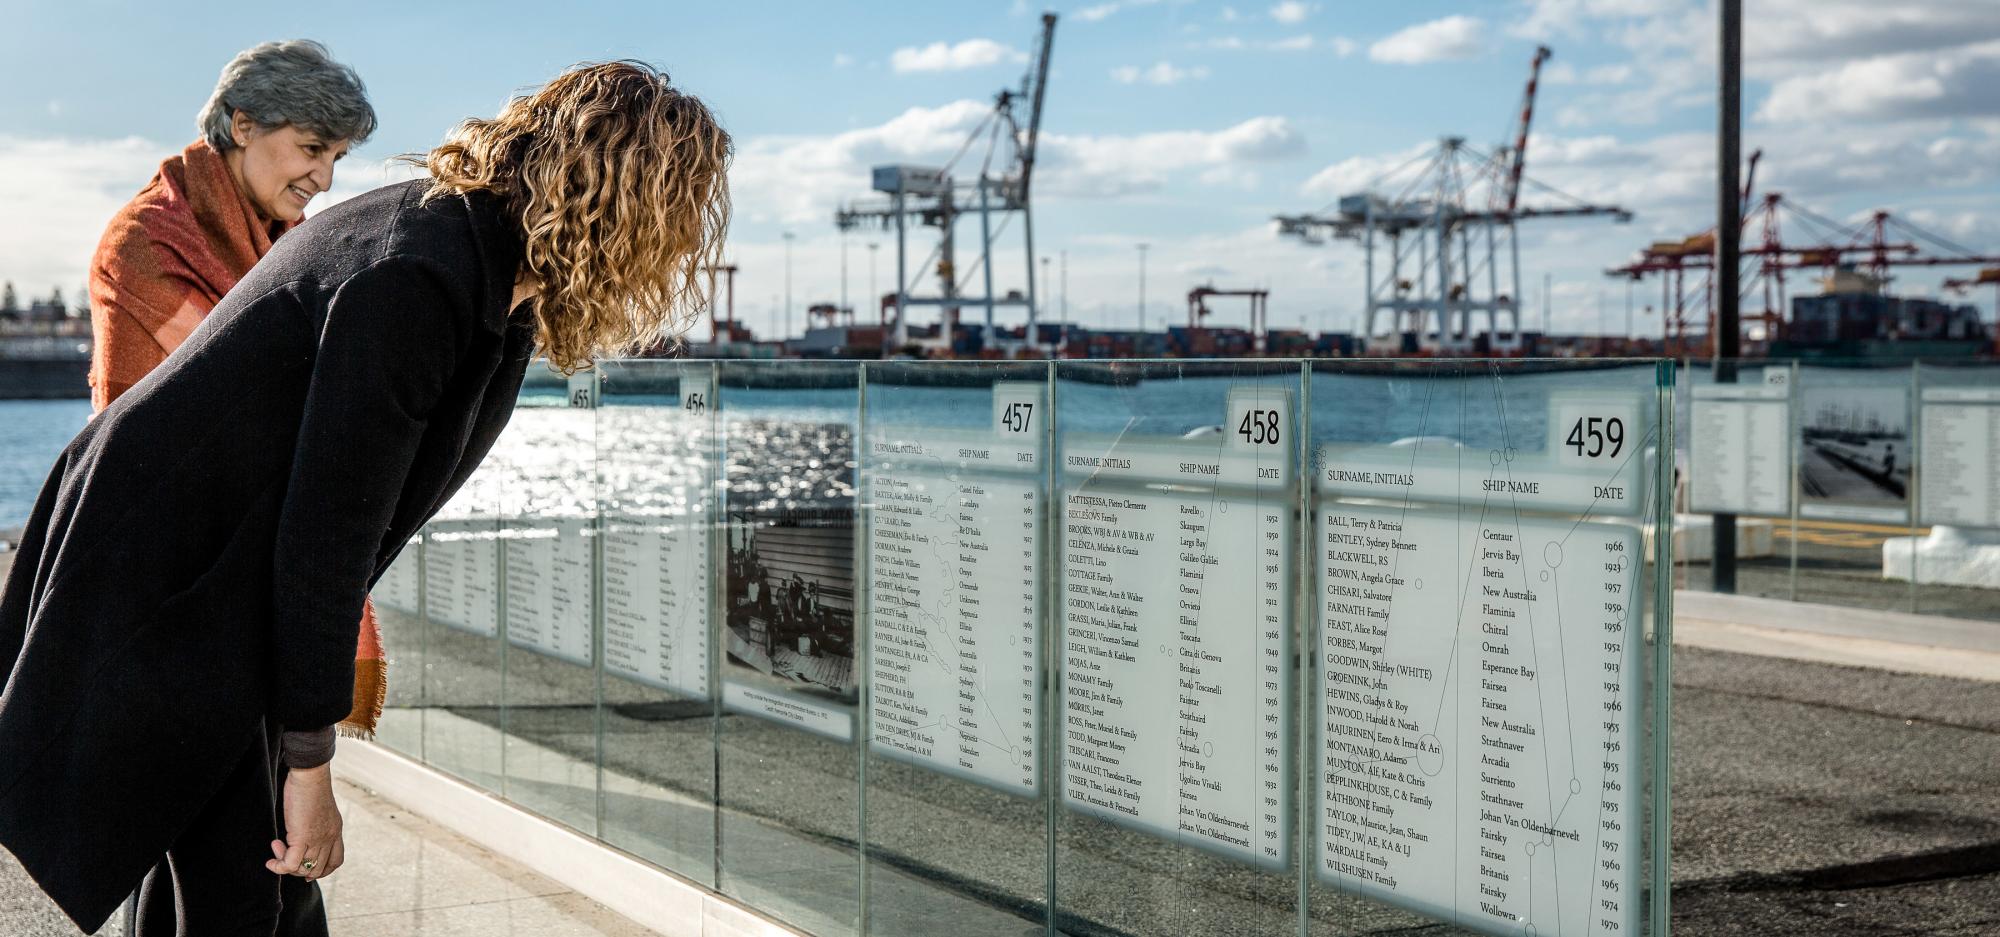 Two people examine the Welcome Walls in front of the WA Maritime Museum